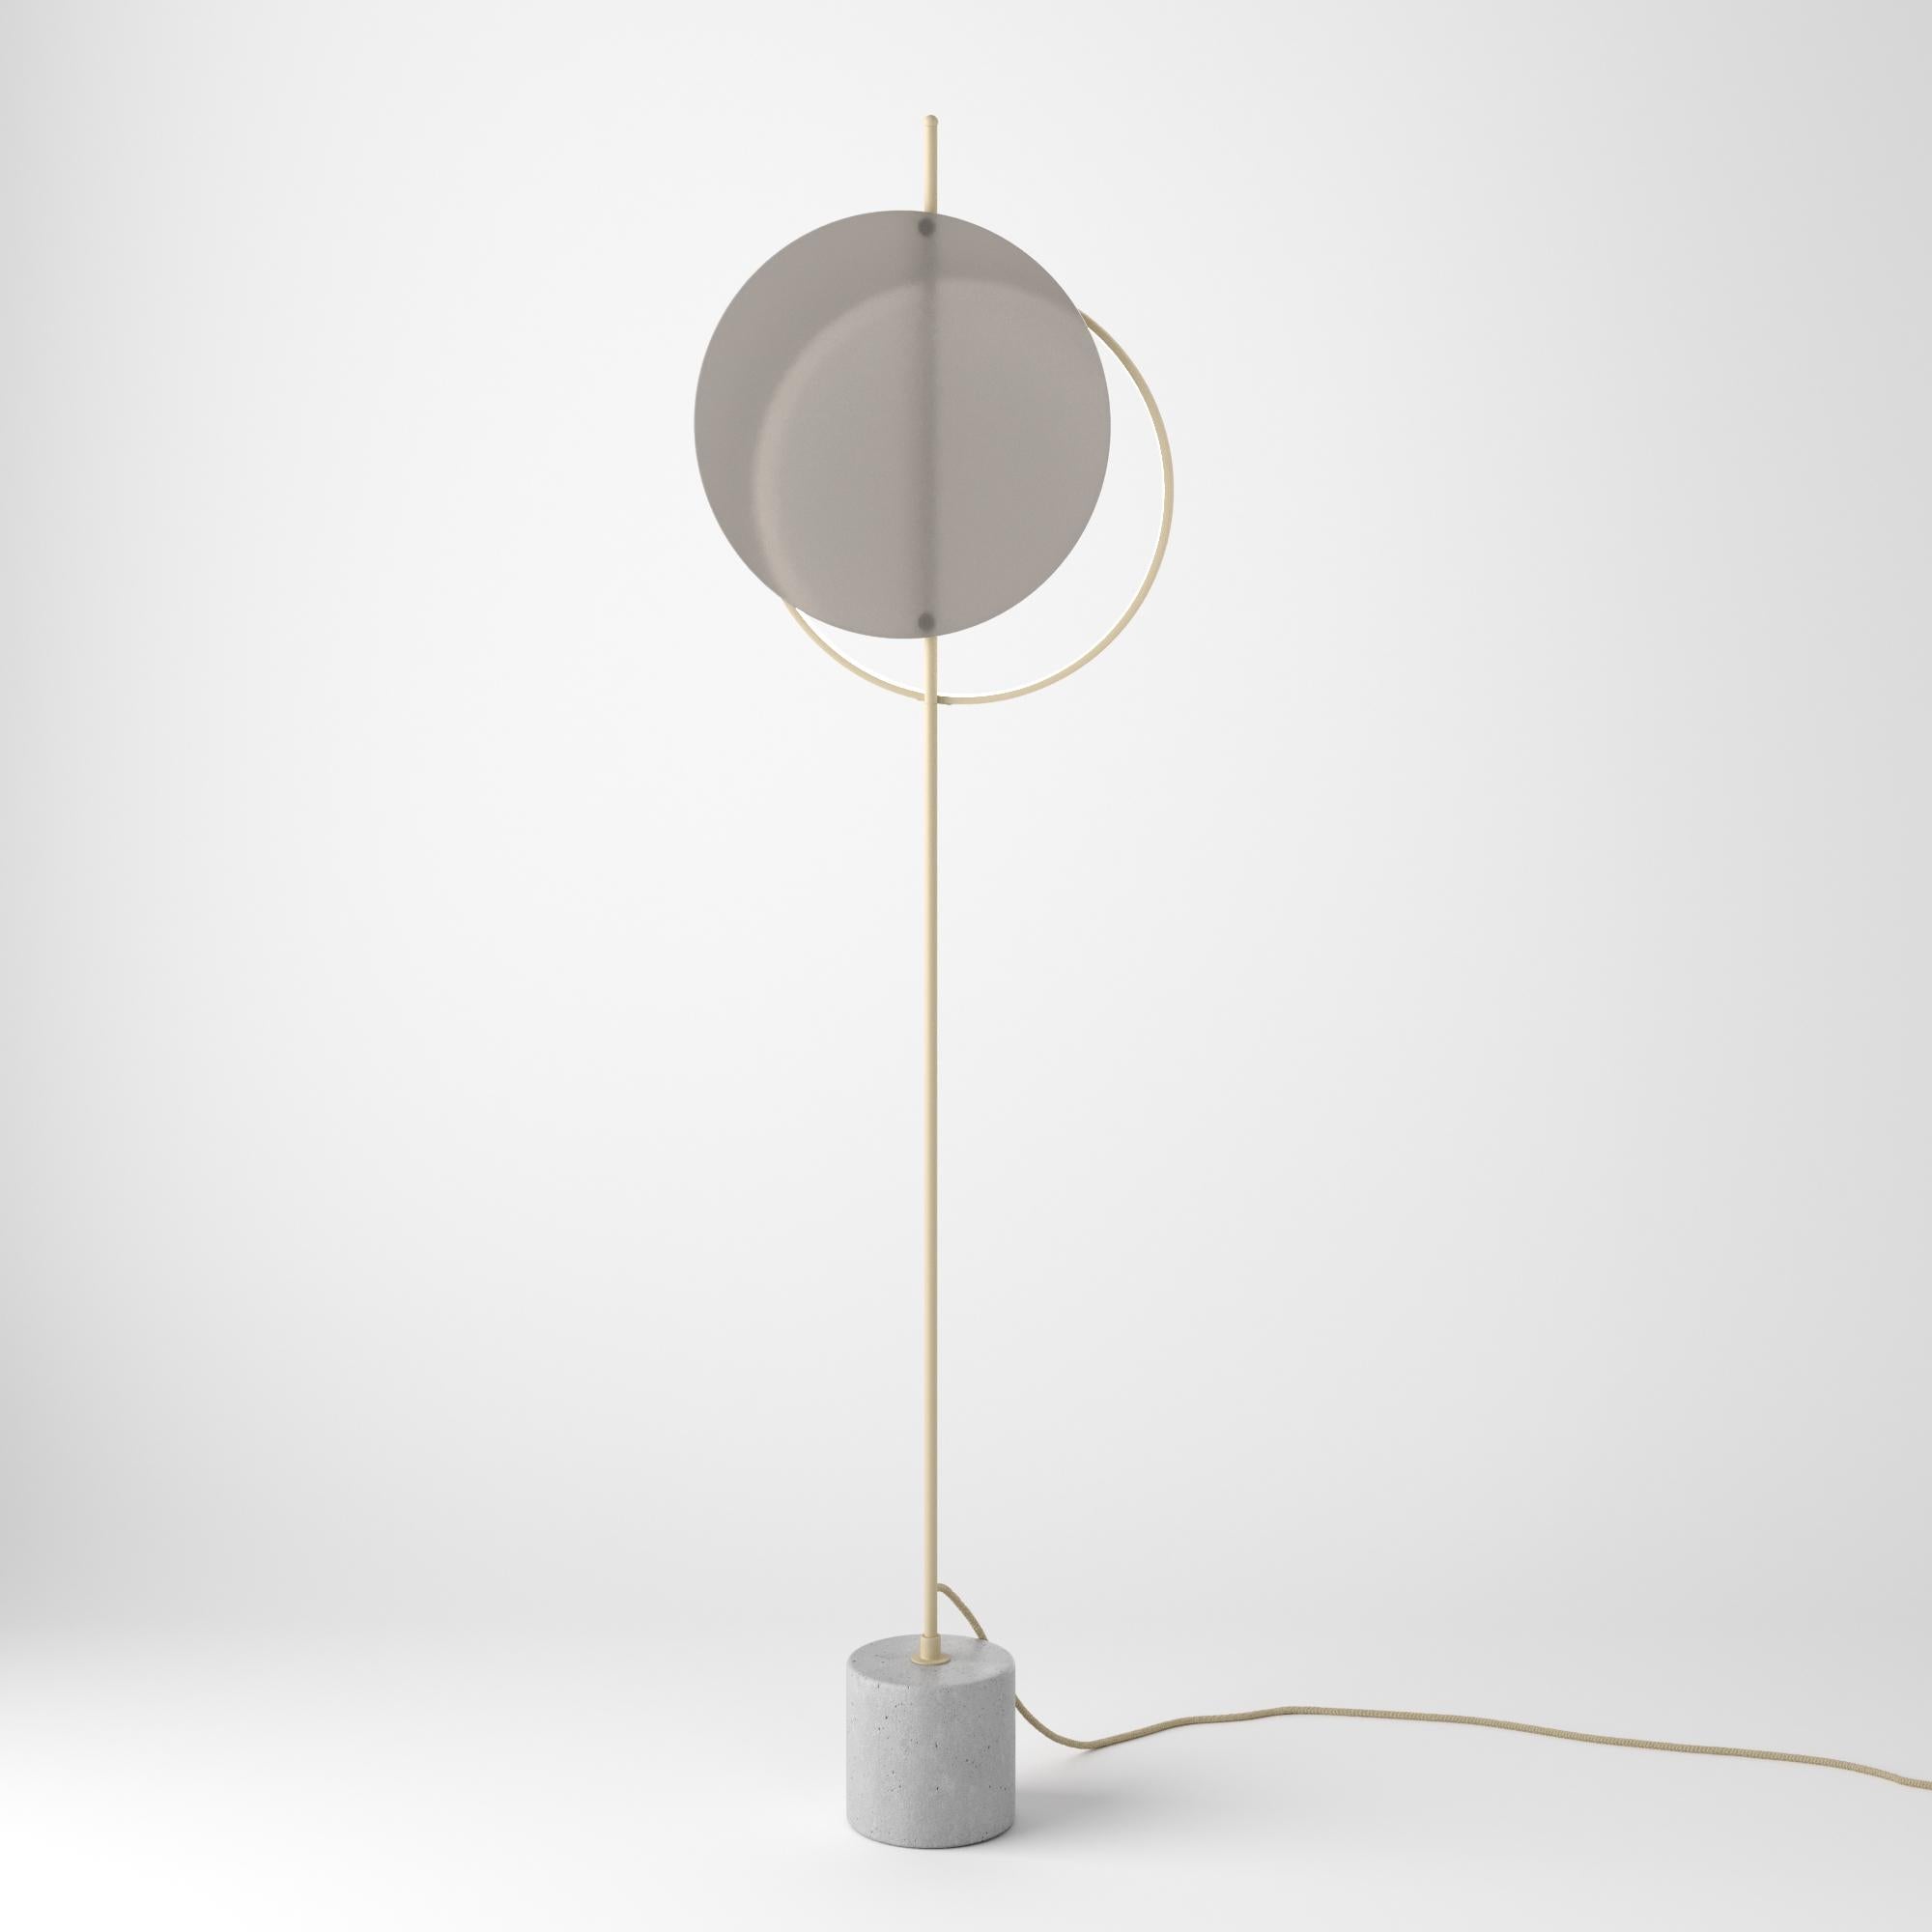 Hand-Crafted Stylish Minimalistic Contemporary Floor Lamp Glass Edition For Sale